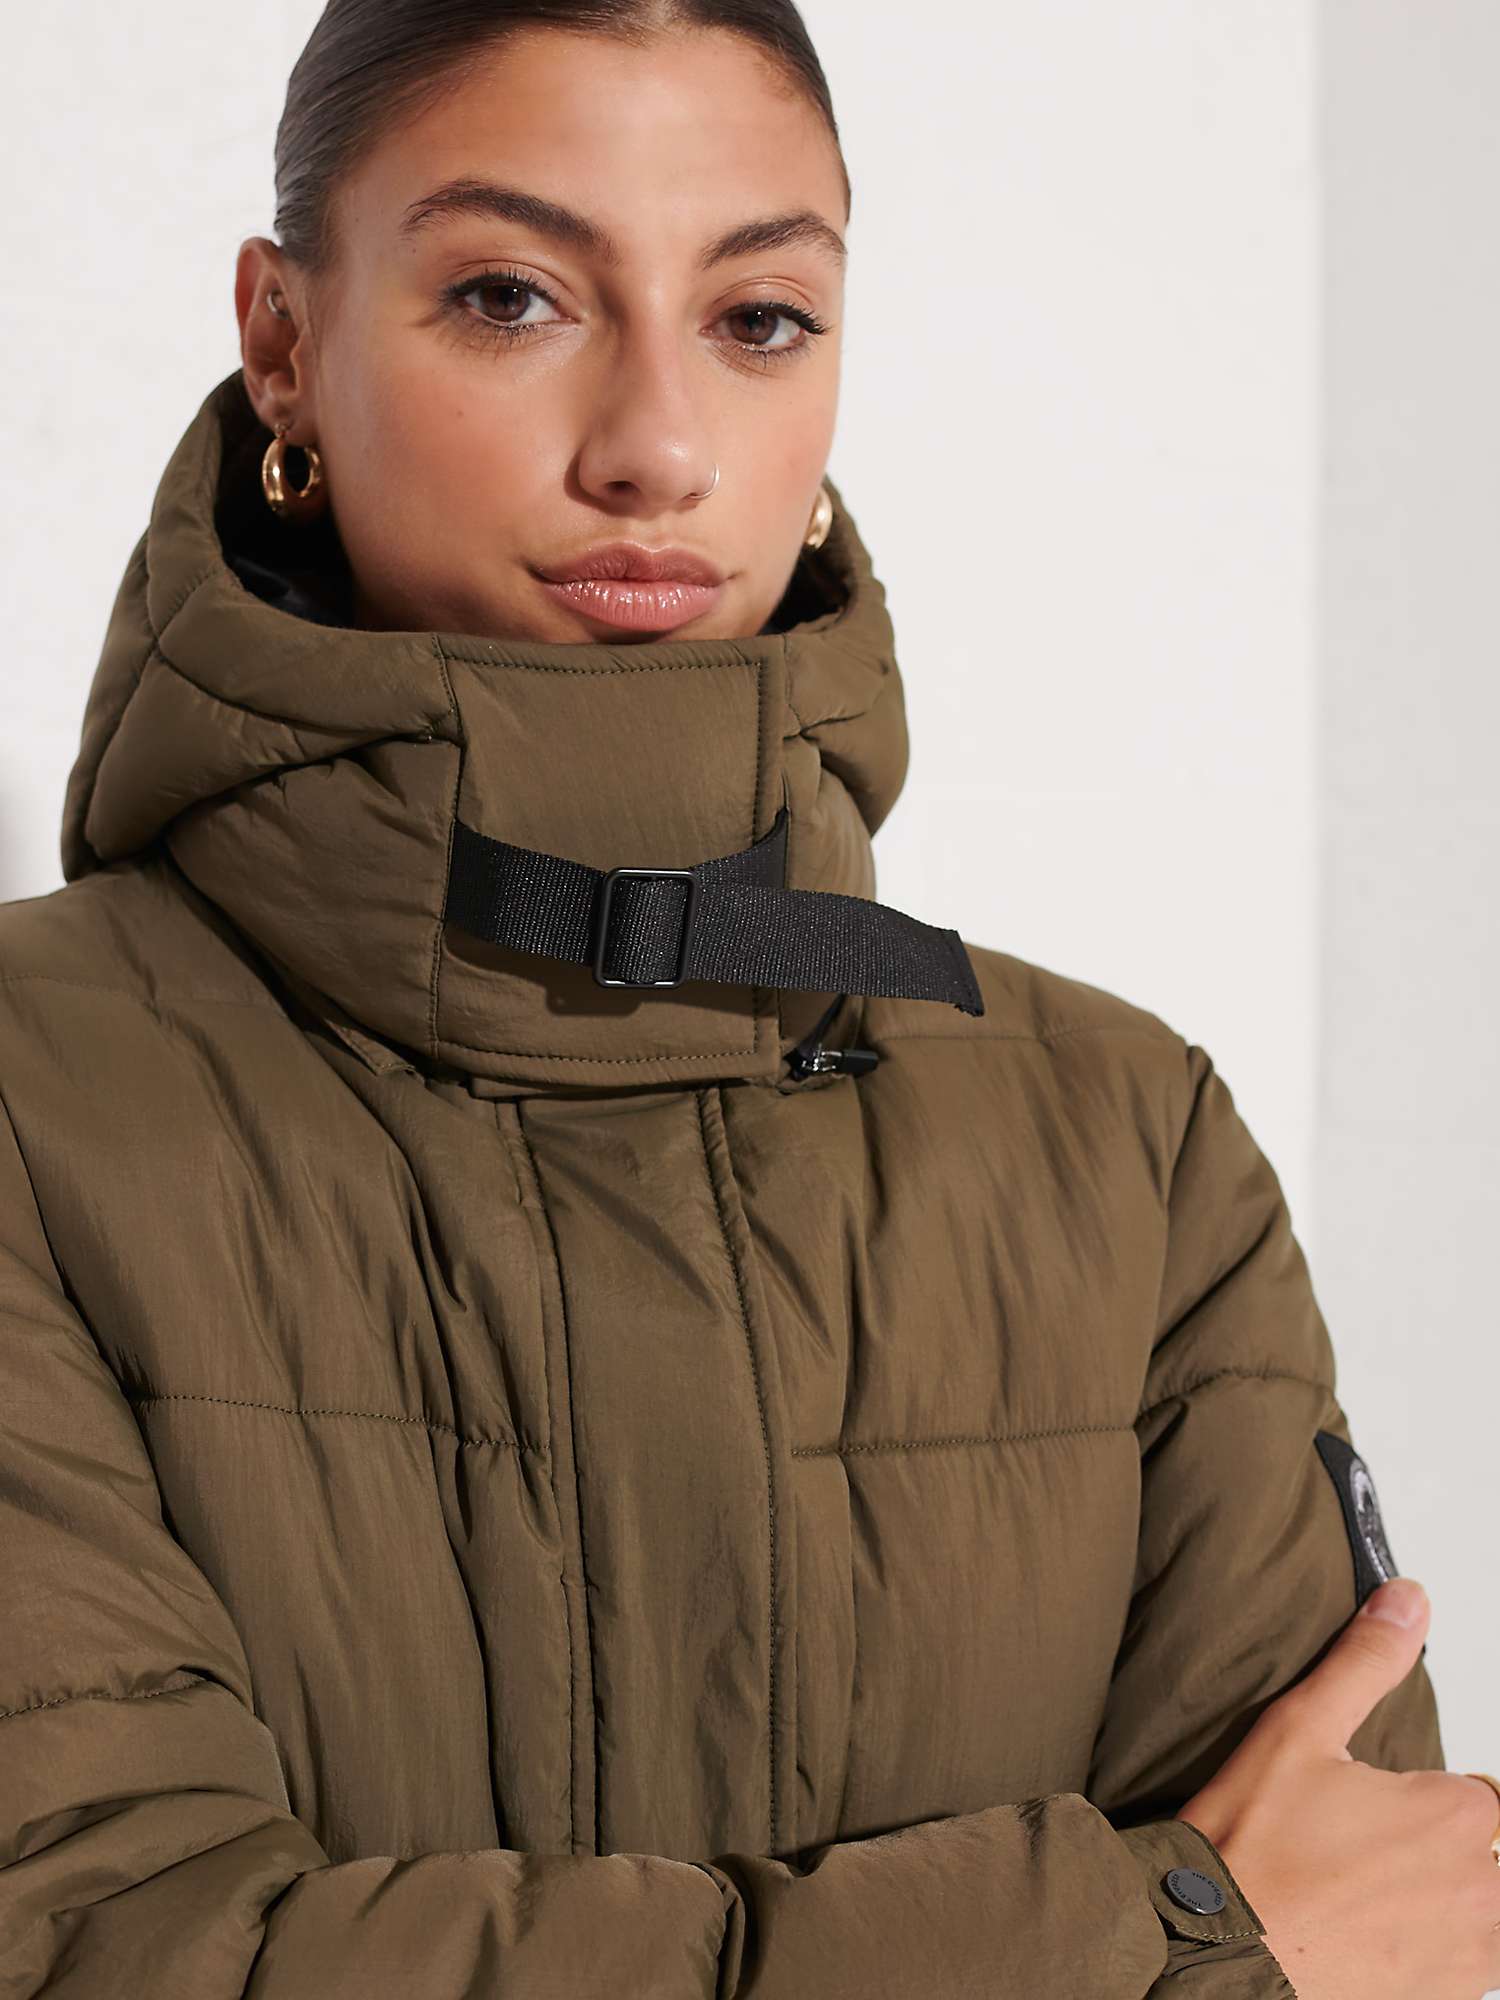 Superdry Expedition Cocoon Padded Coat, Dark Moss at John Lewis & Partners